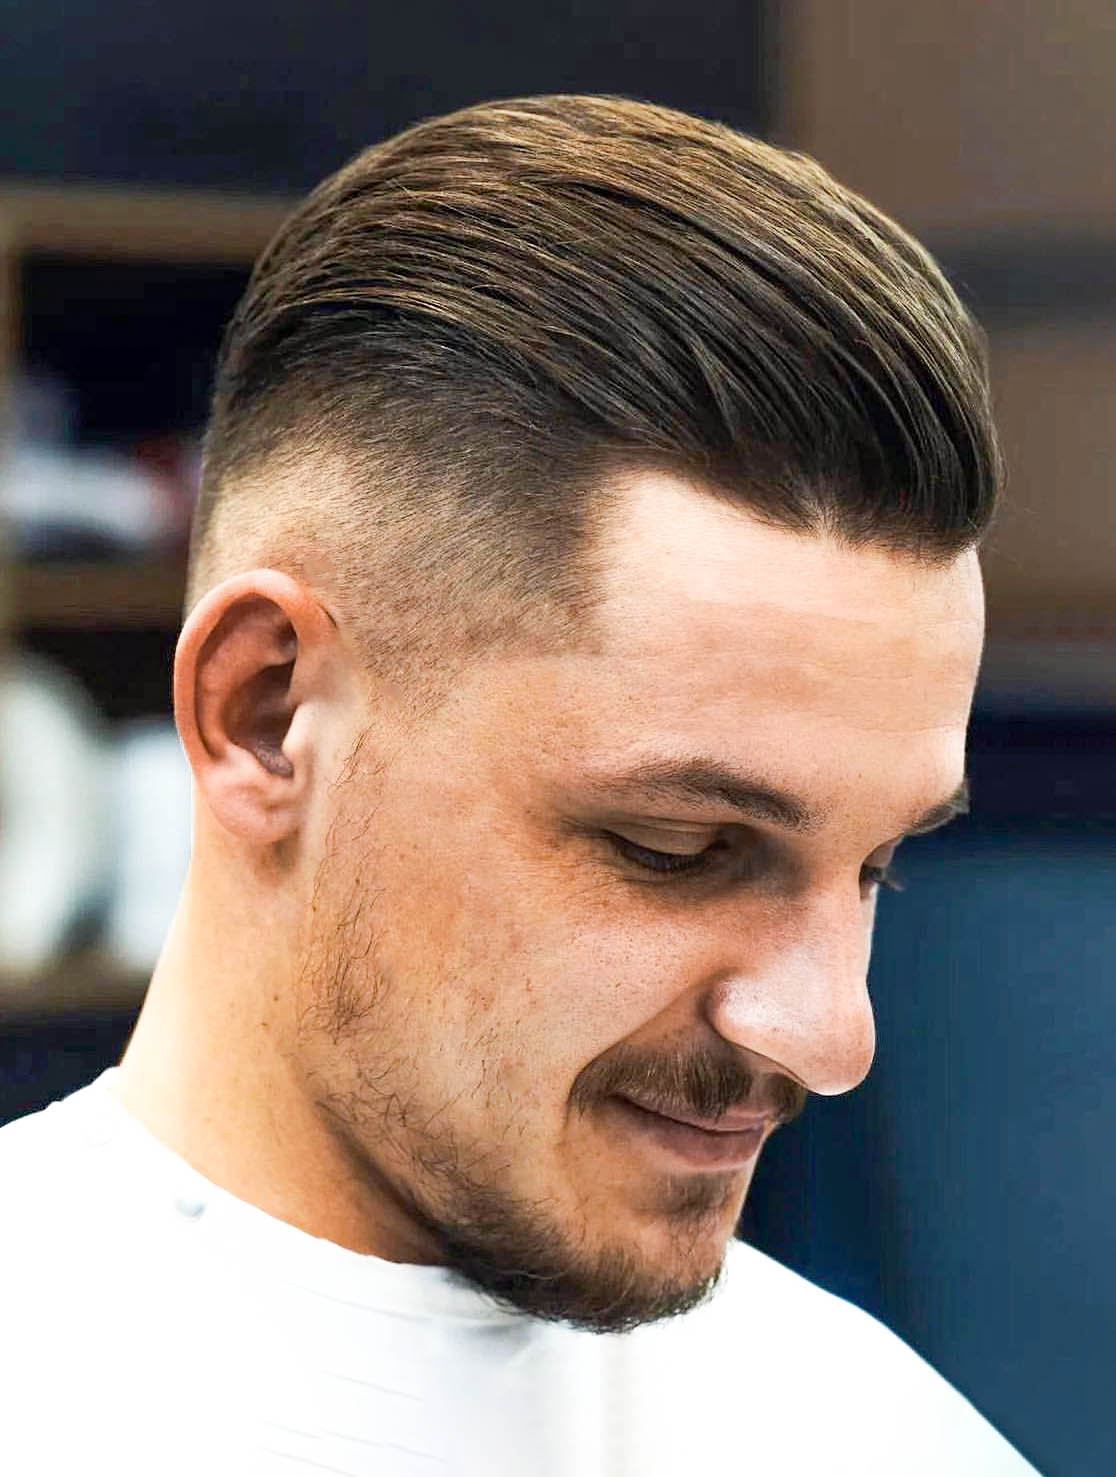 astronomi hørbar Umulig 40 Slicked Back Hairstyles: A Classy Style Made Simple + Guide | Haircut  Inspiration